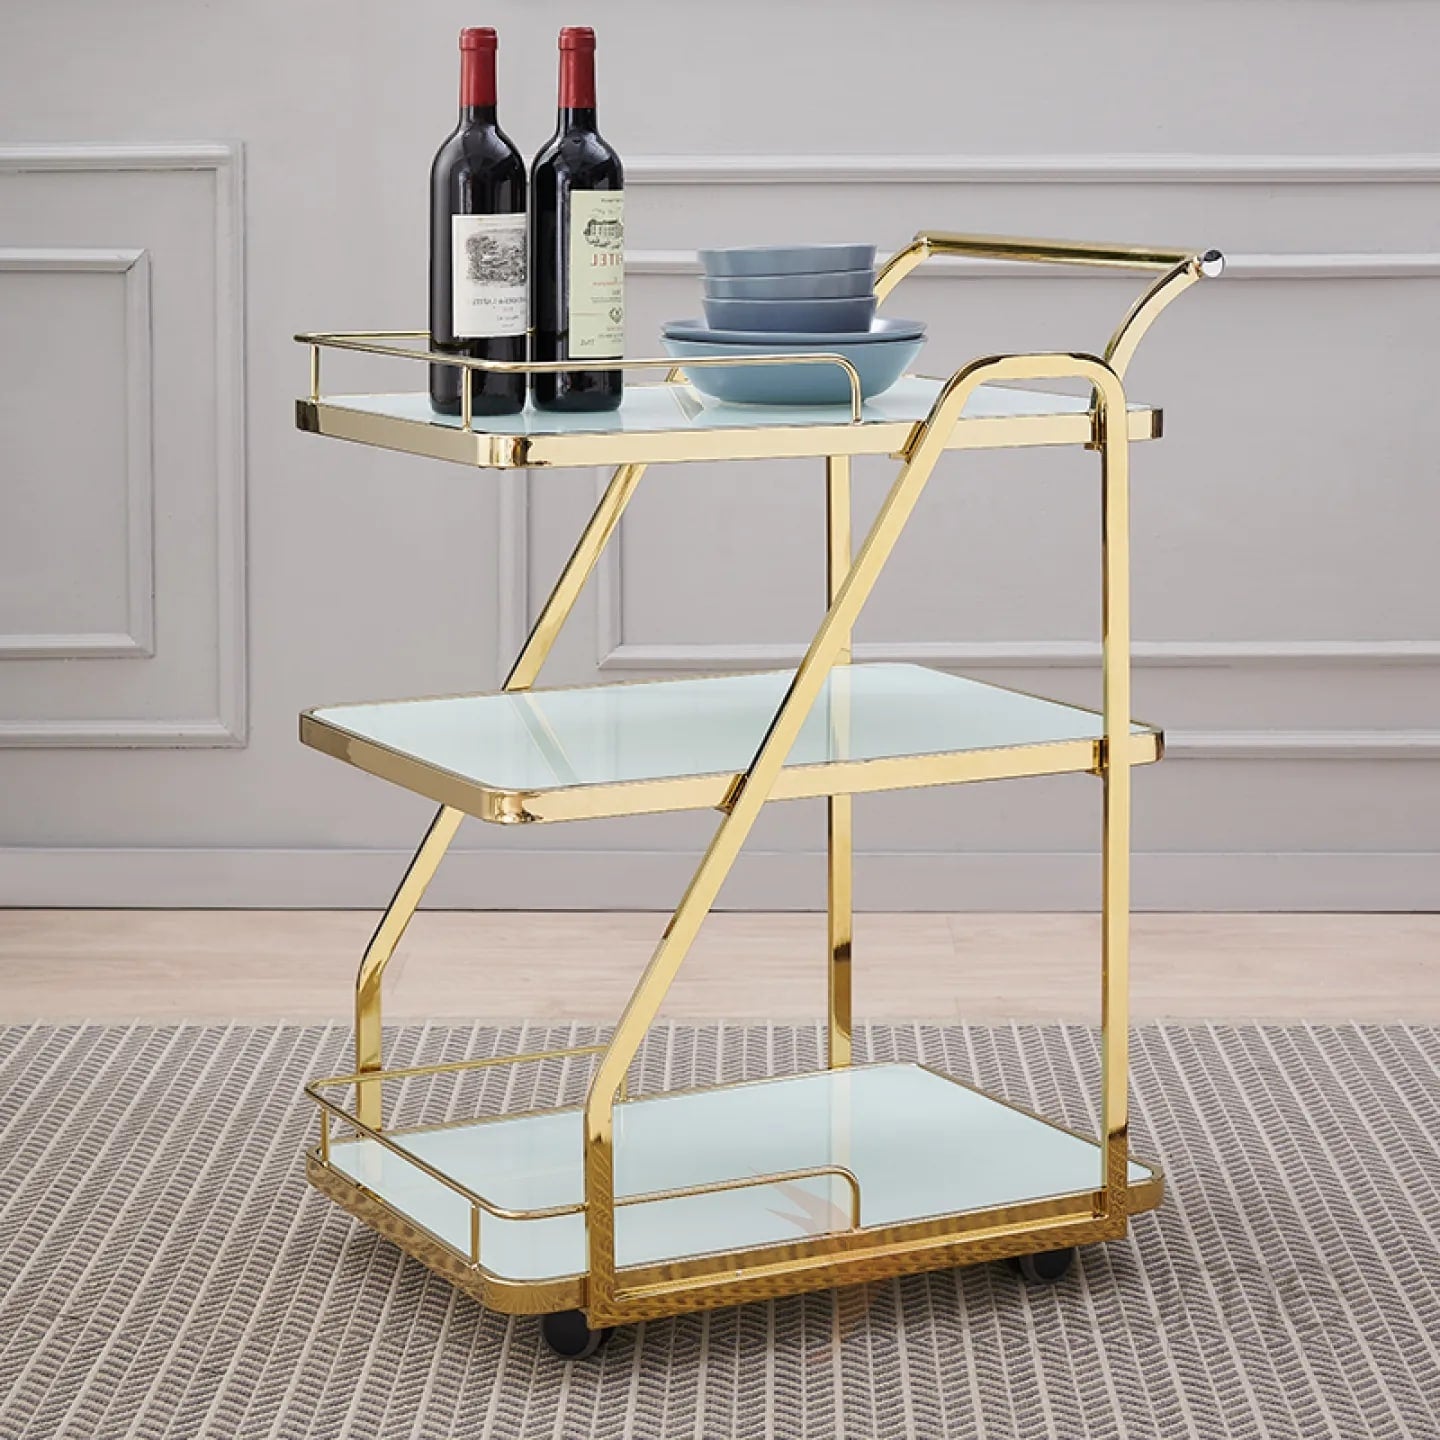 3 Tier Nordic Luxury Wooden Base Tea Trolley with metal stand